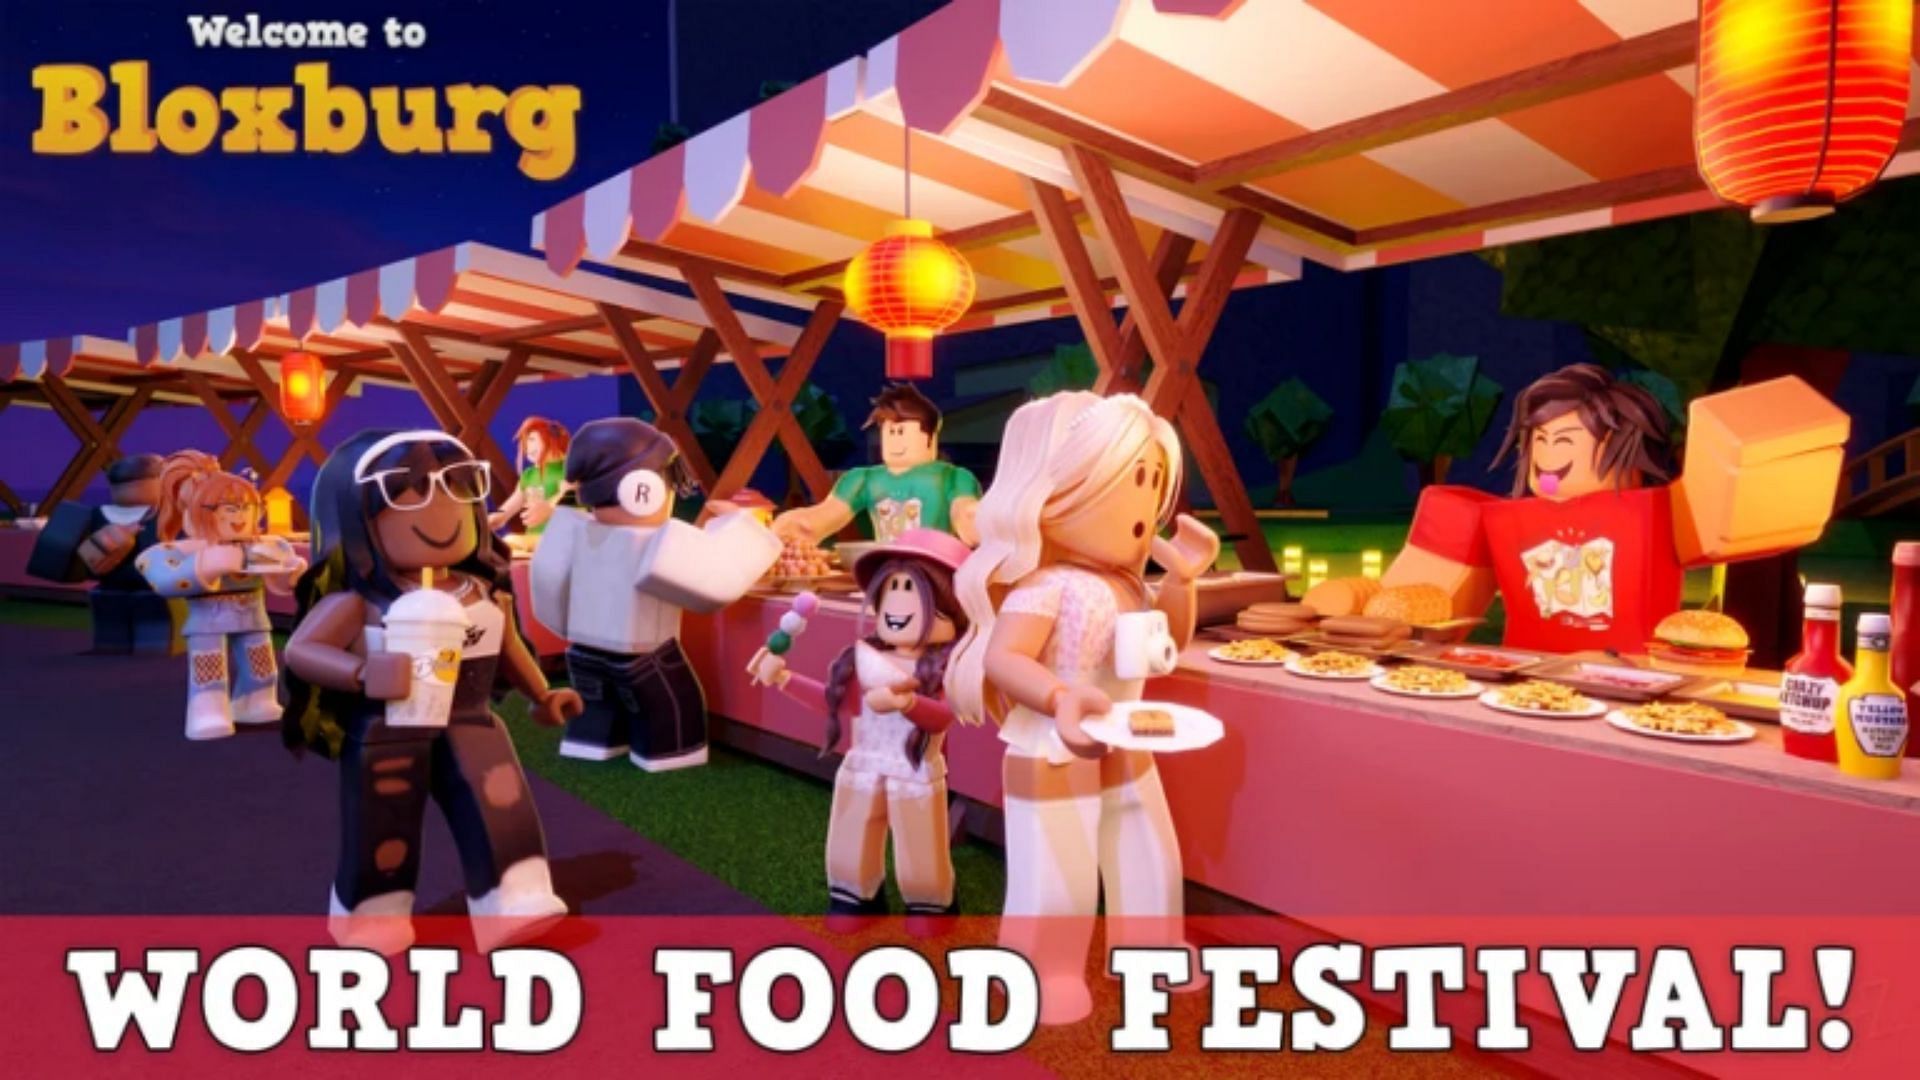 All food items at the Welcome to Bloxburg World Food Festival